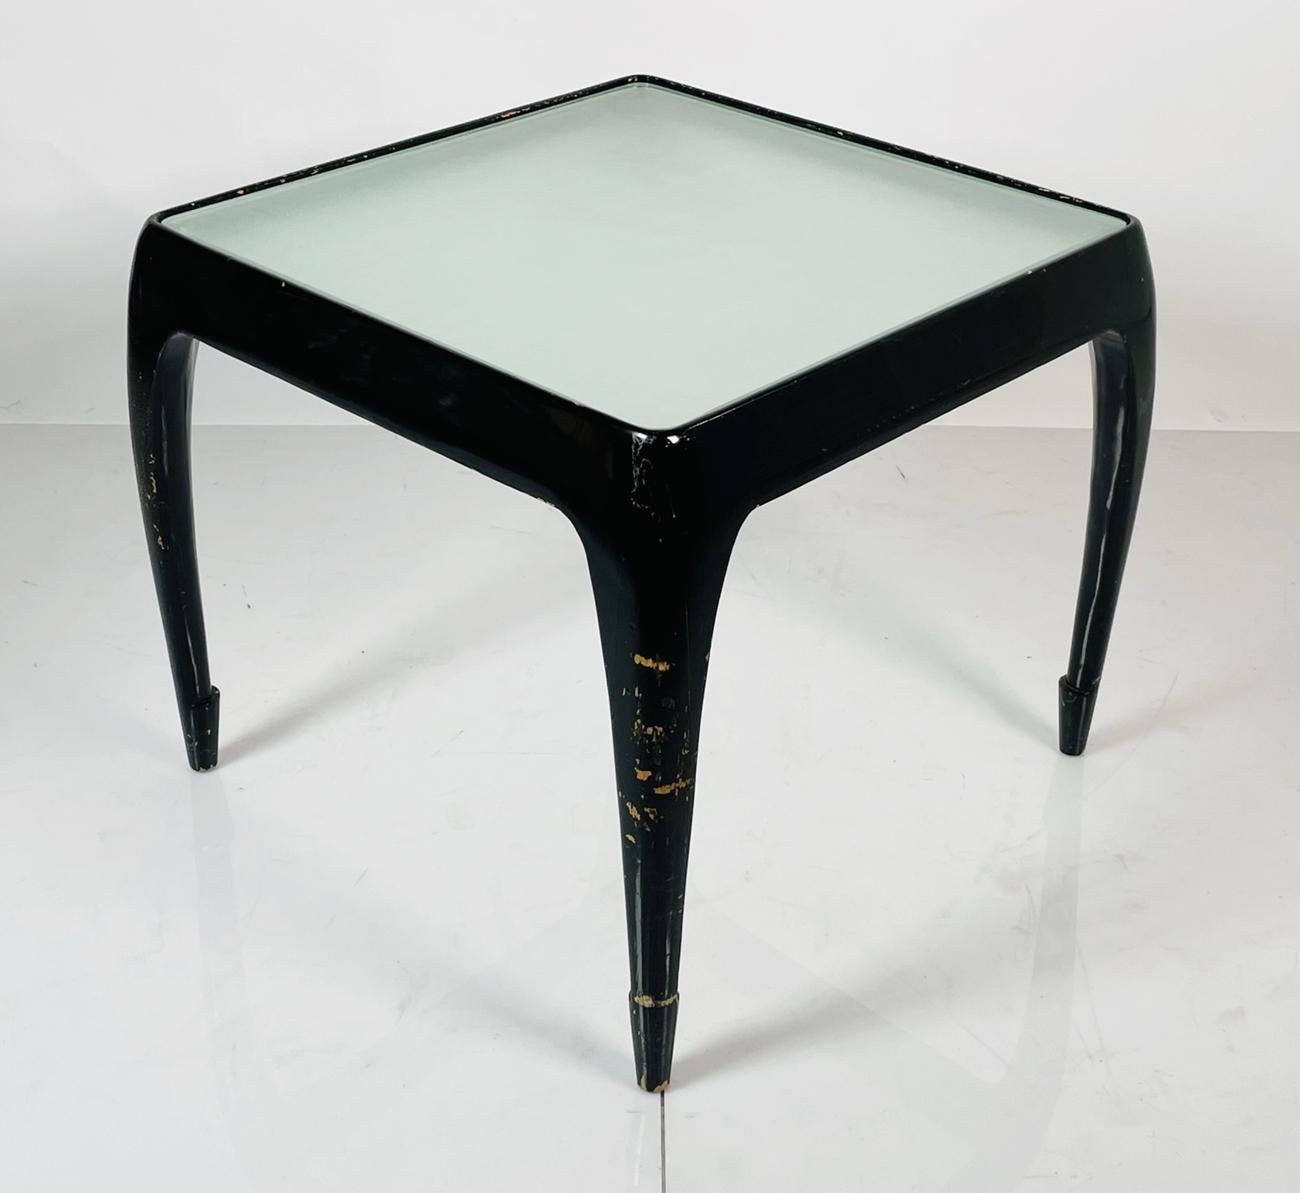 Stunning side/end table designed and manufactured by Johan Tapp.

The table has beautiful lines and a thick glass top.
The table is signed.

Measurements:
26 inches square x 22 inches high.